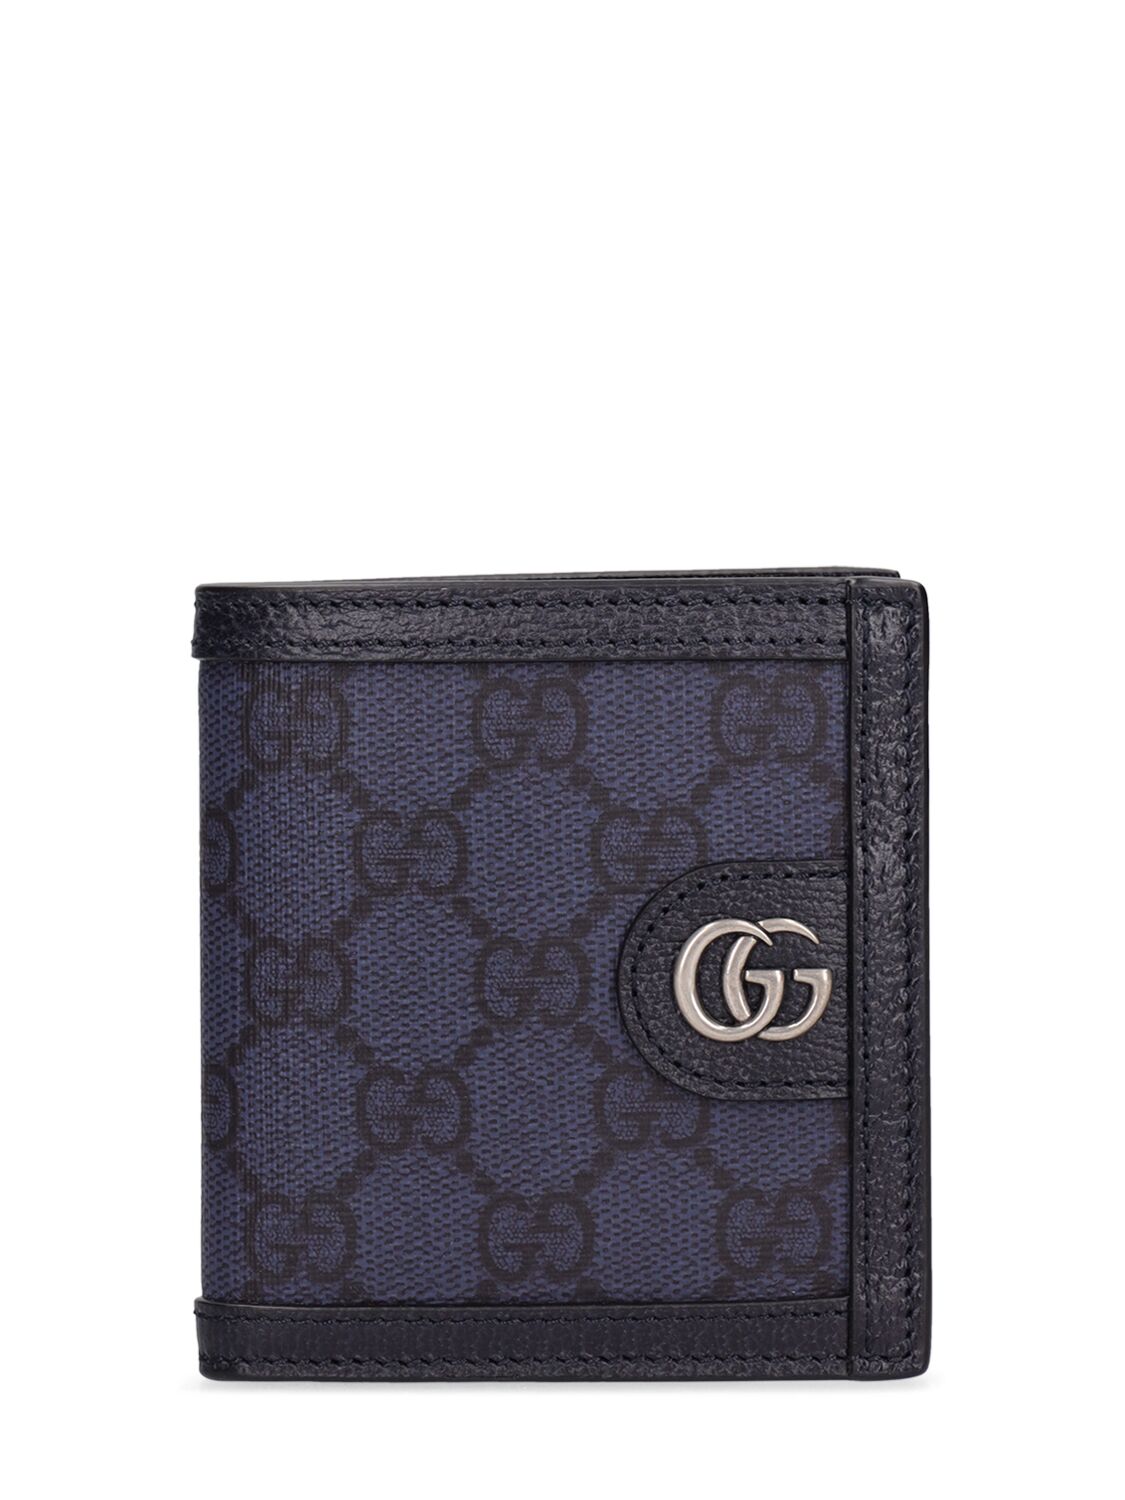 Ophidia Gg Supreme Wallet